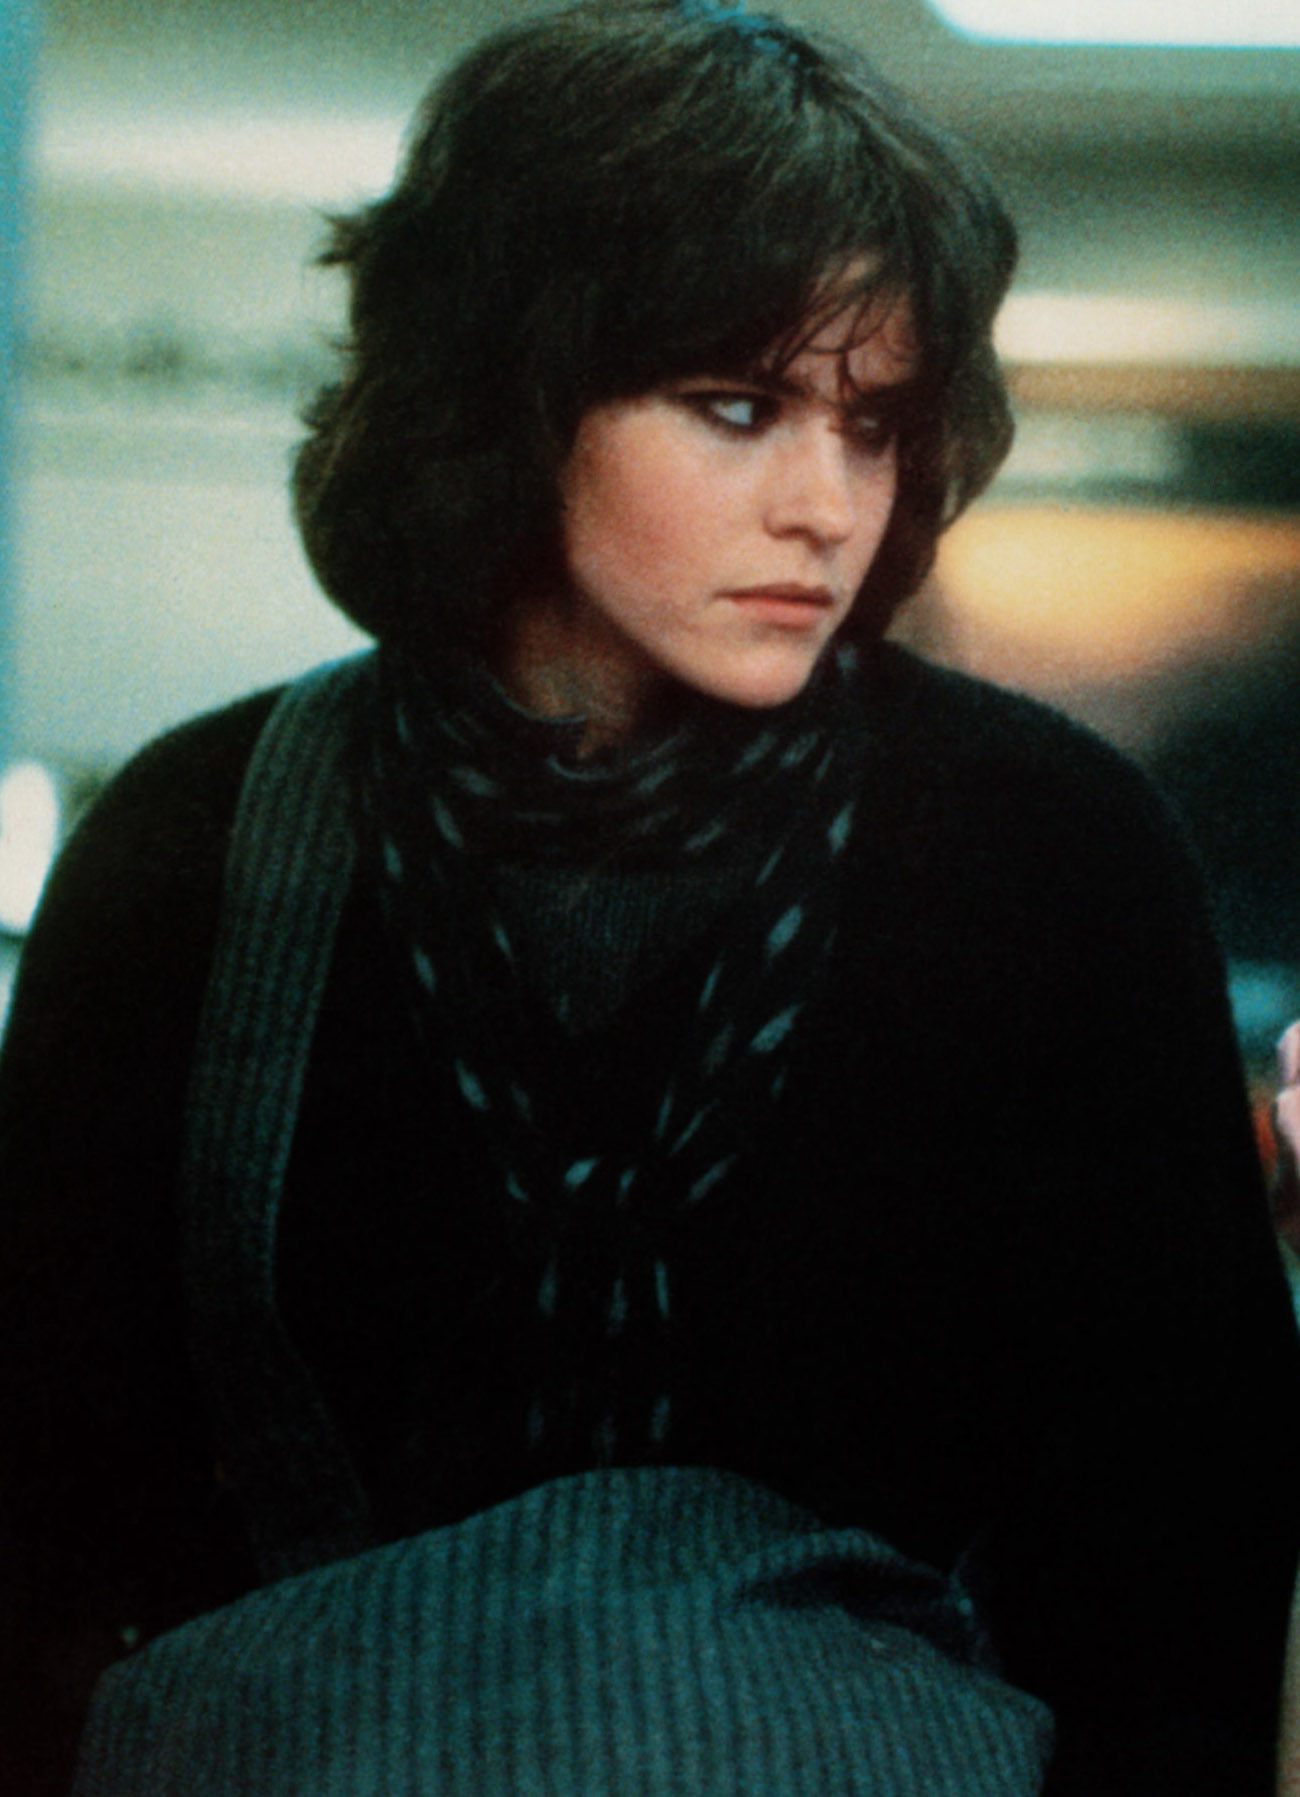 Sheedy in &quot;The Breakfast Club&quot;